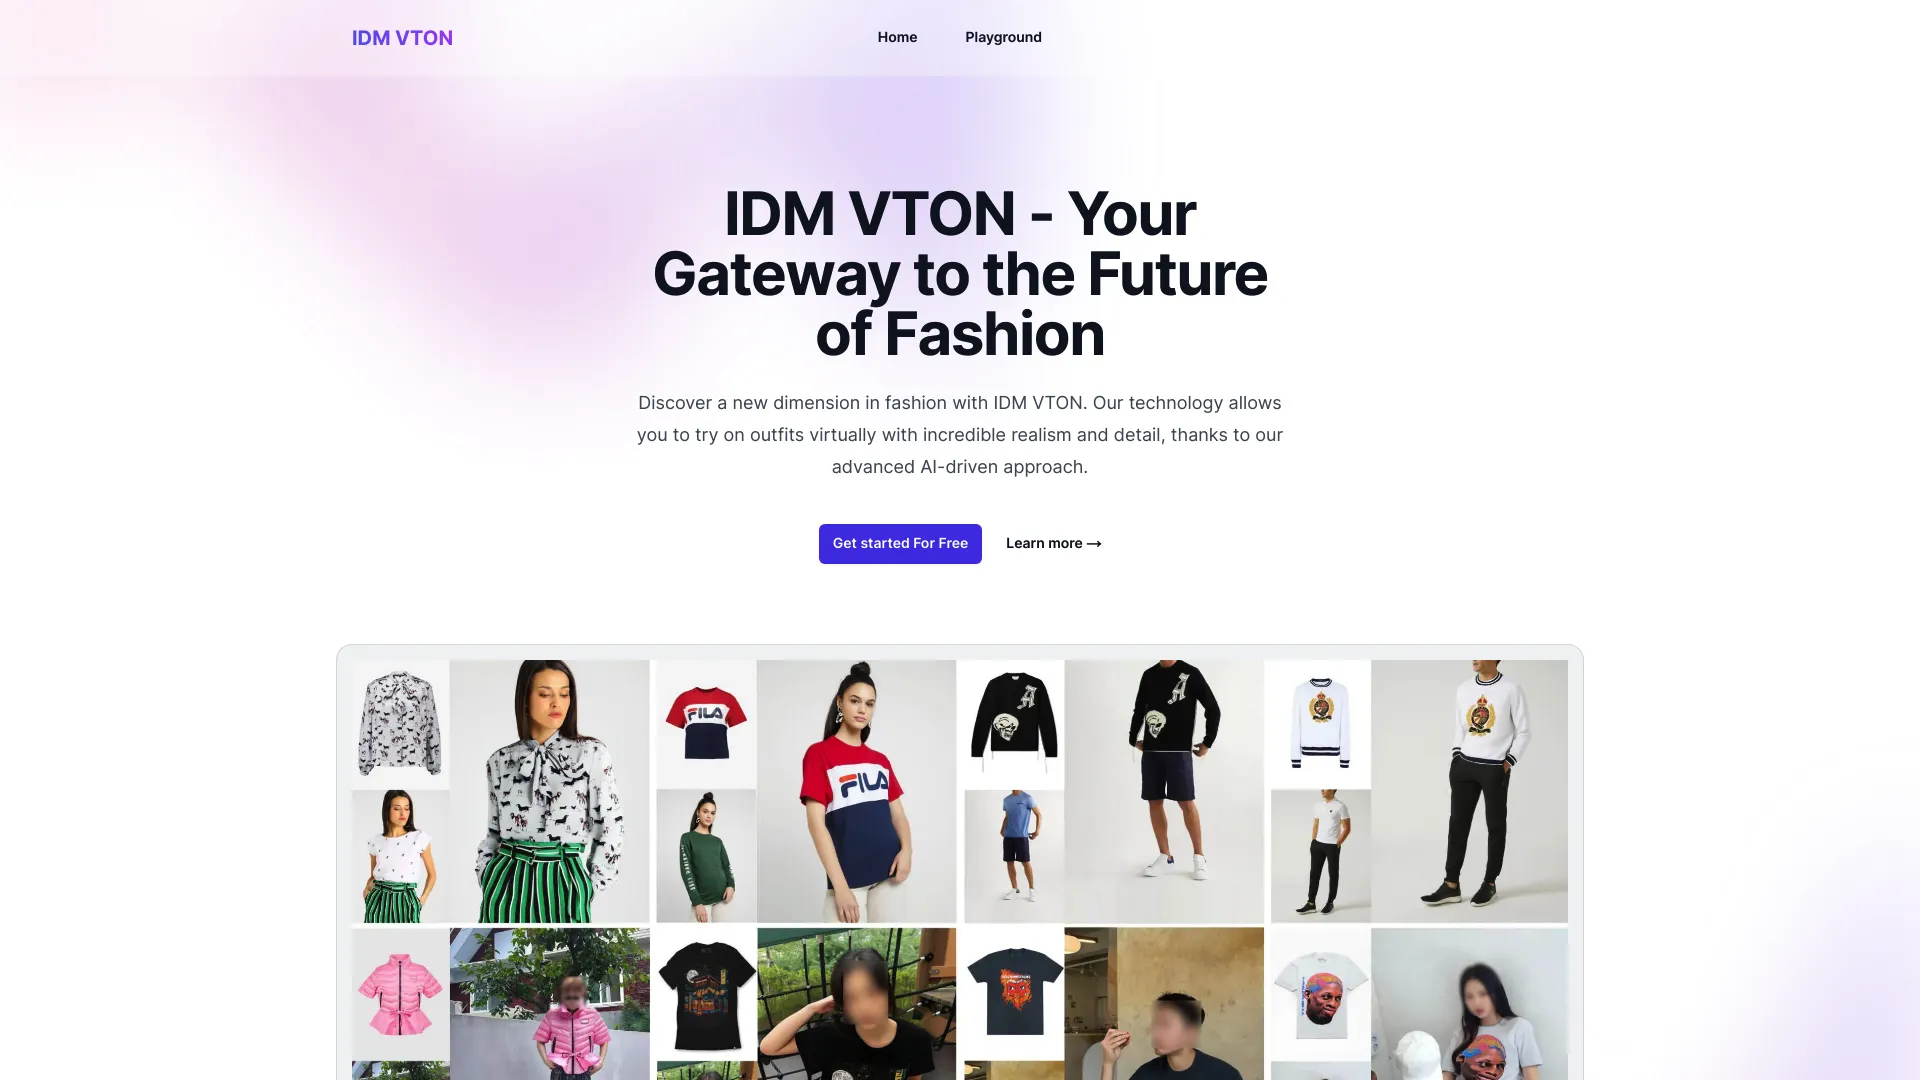 IDM VTON Online - Free Online Access for Virtual Try-Ons